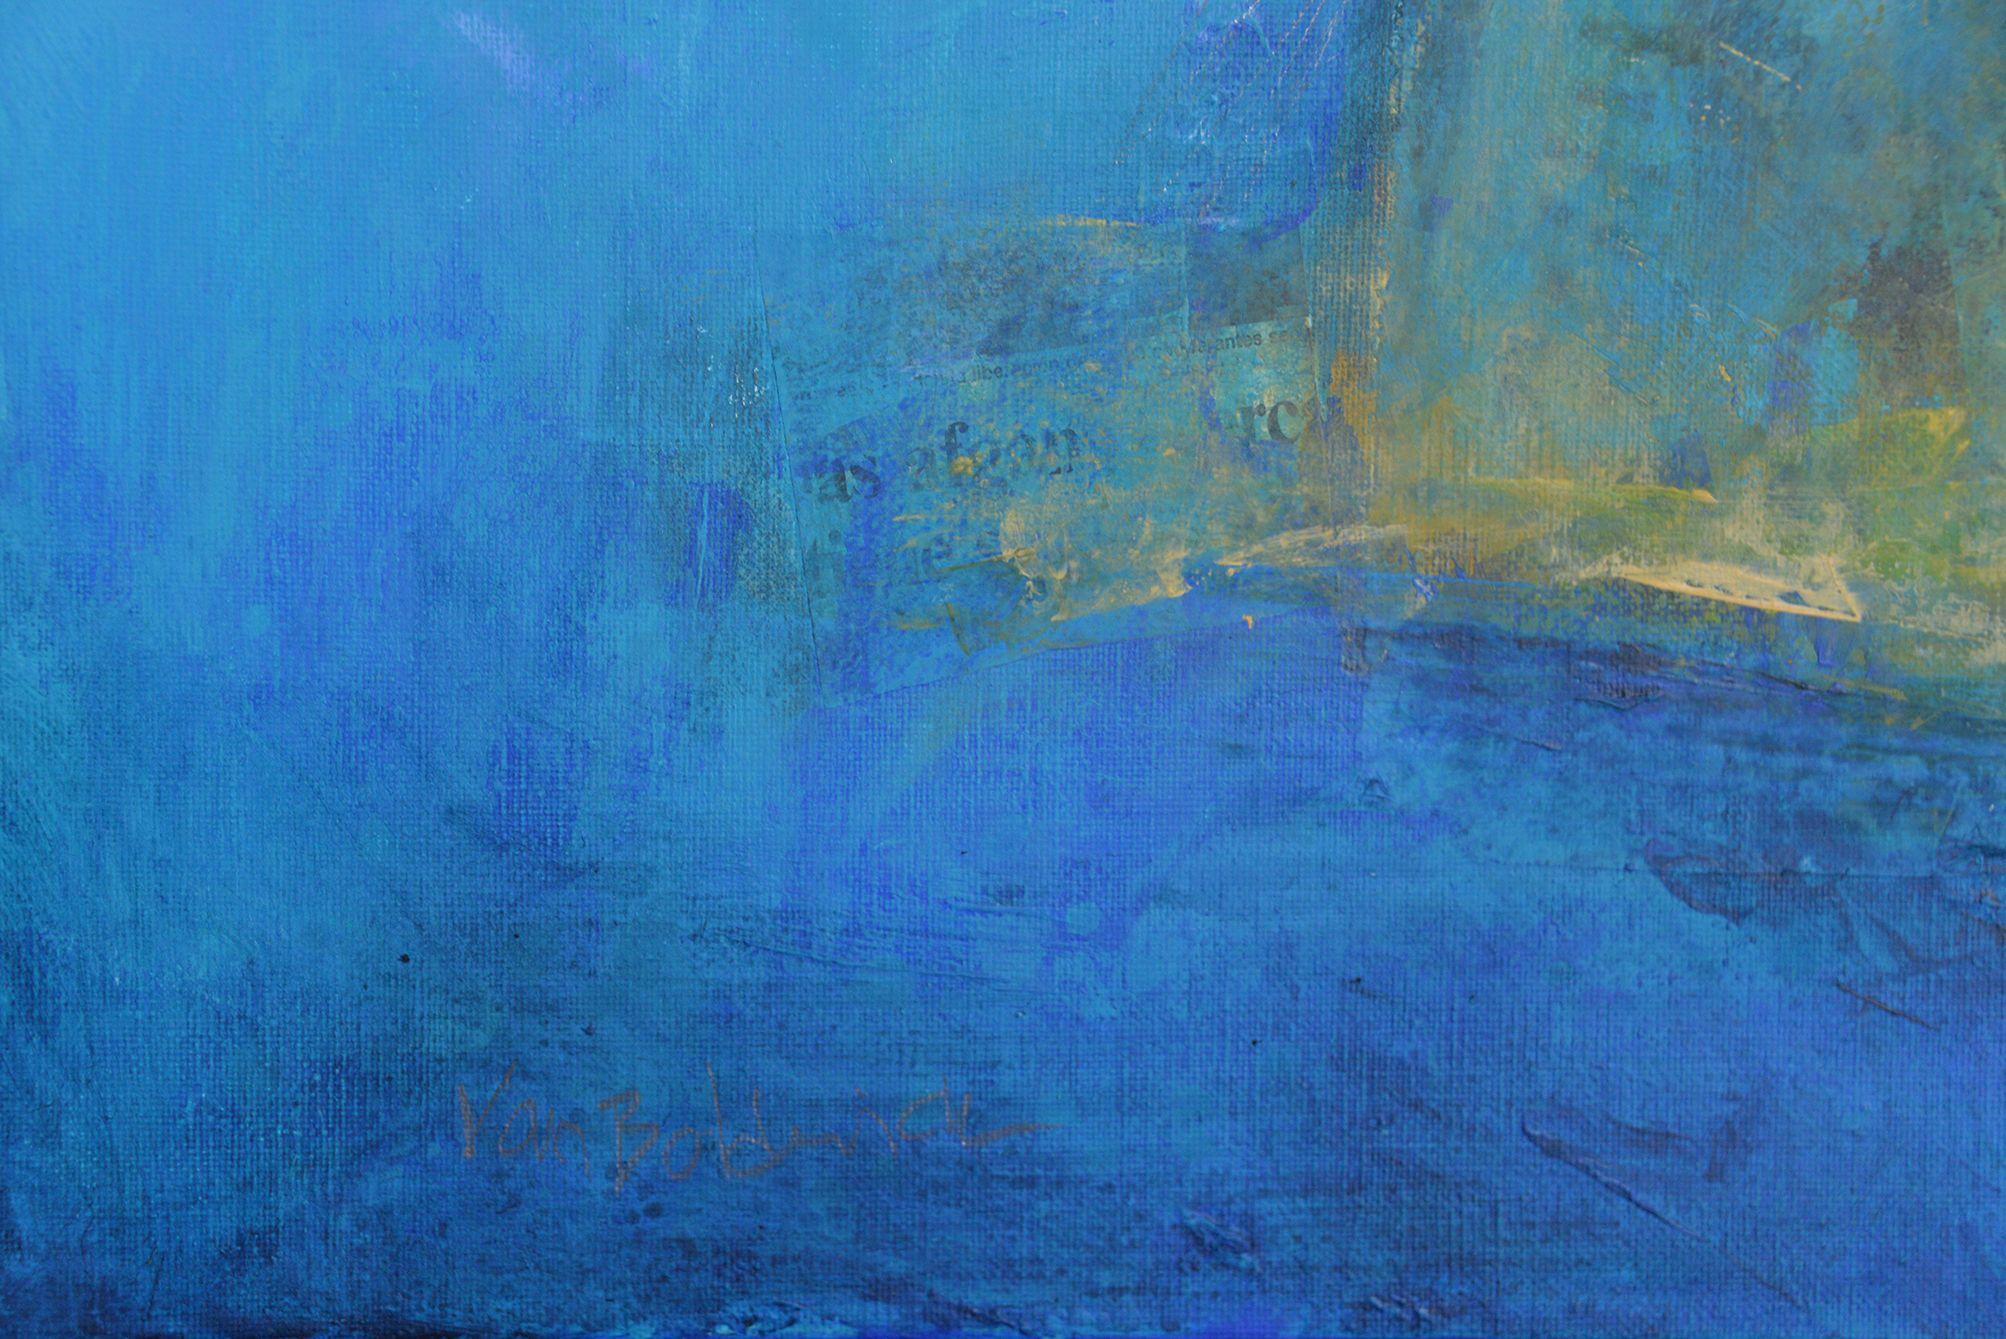 Le sacre du printemps, Painting, Oil on Canvas - Blue Abstract Painting by Robert van Bolderick